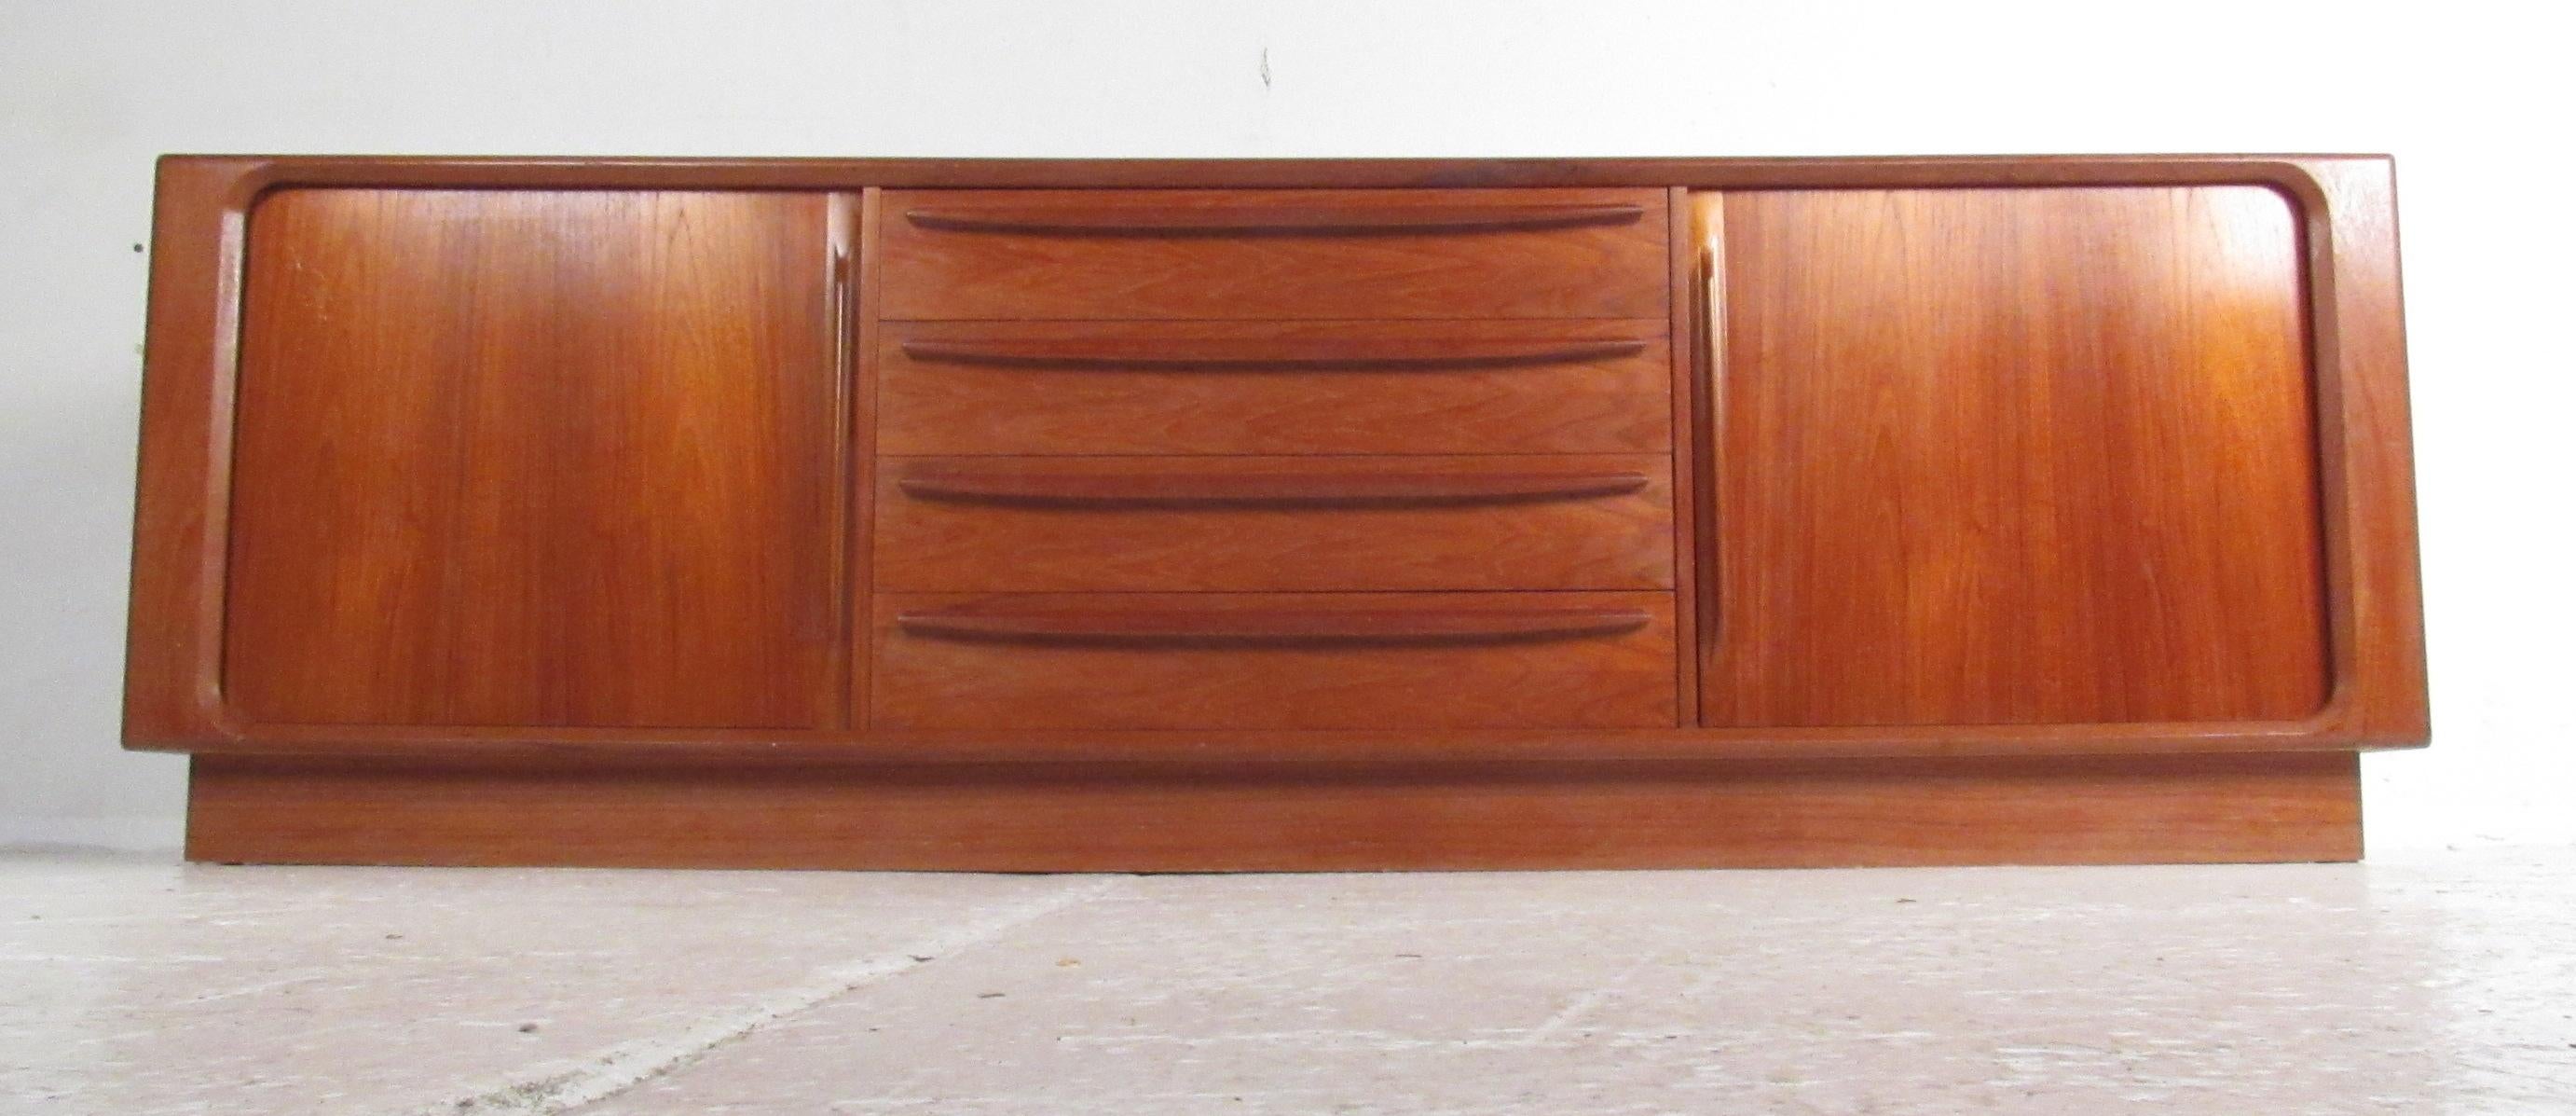 Beautiful tambour door teak sideboard manufactured in Denmark in the 1960s. Four large center drawers are flanked by a pair of tambour doors revealing an adjustable shelf on one side and three tray drawers on the other. The finished backside allows